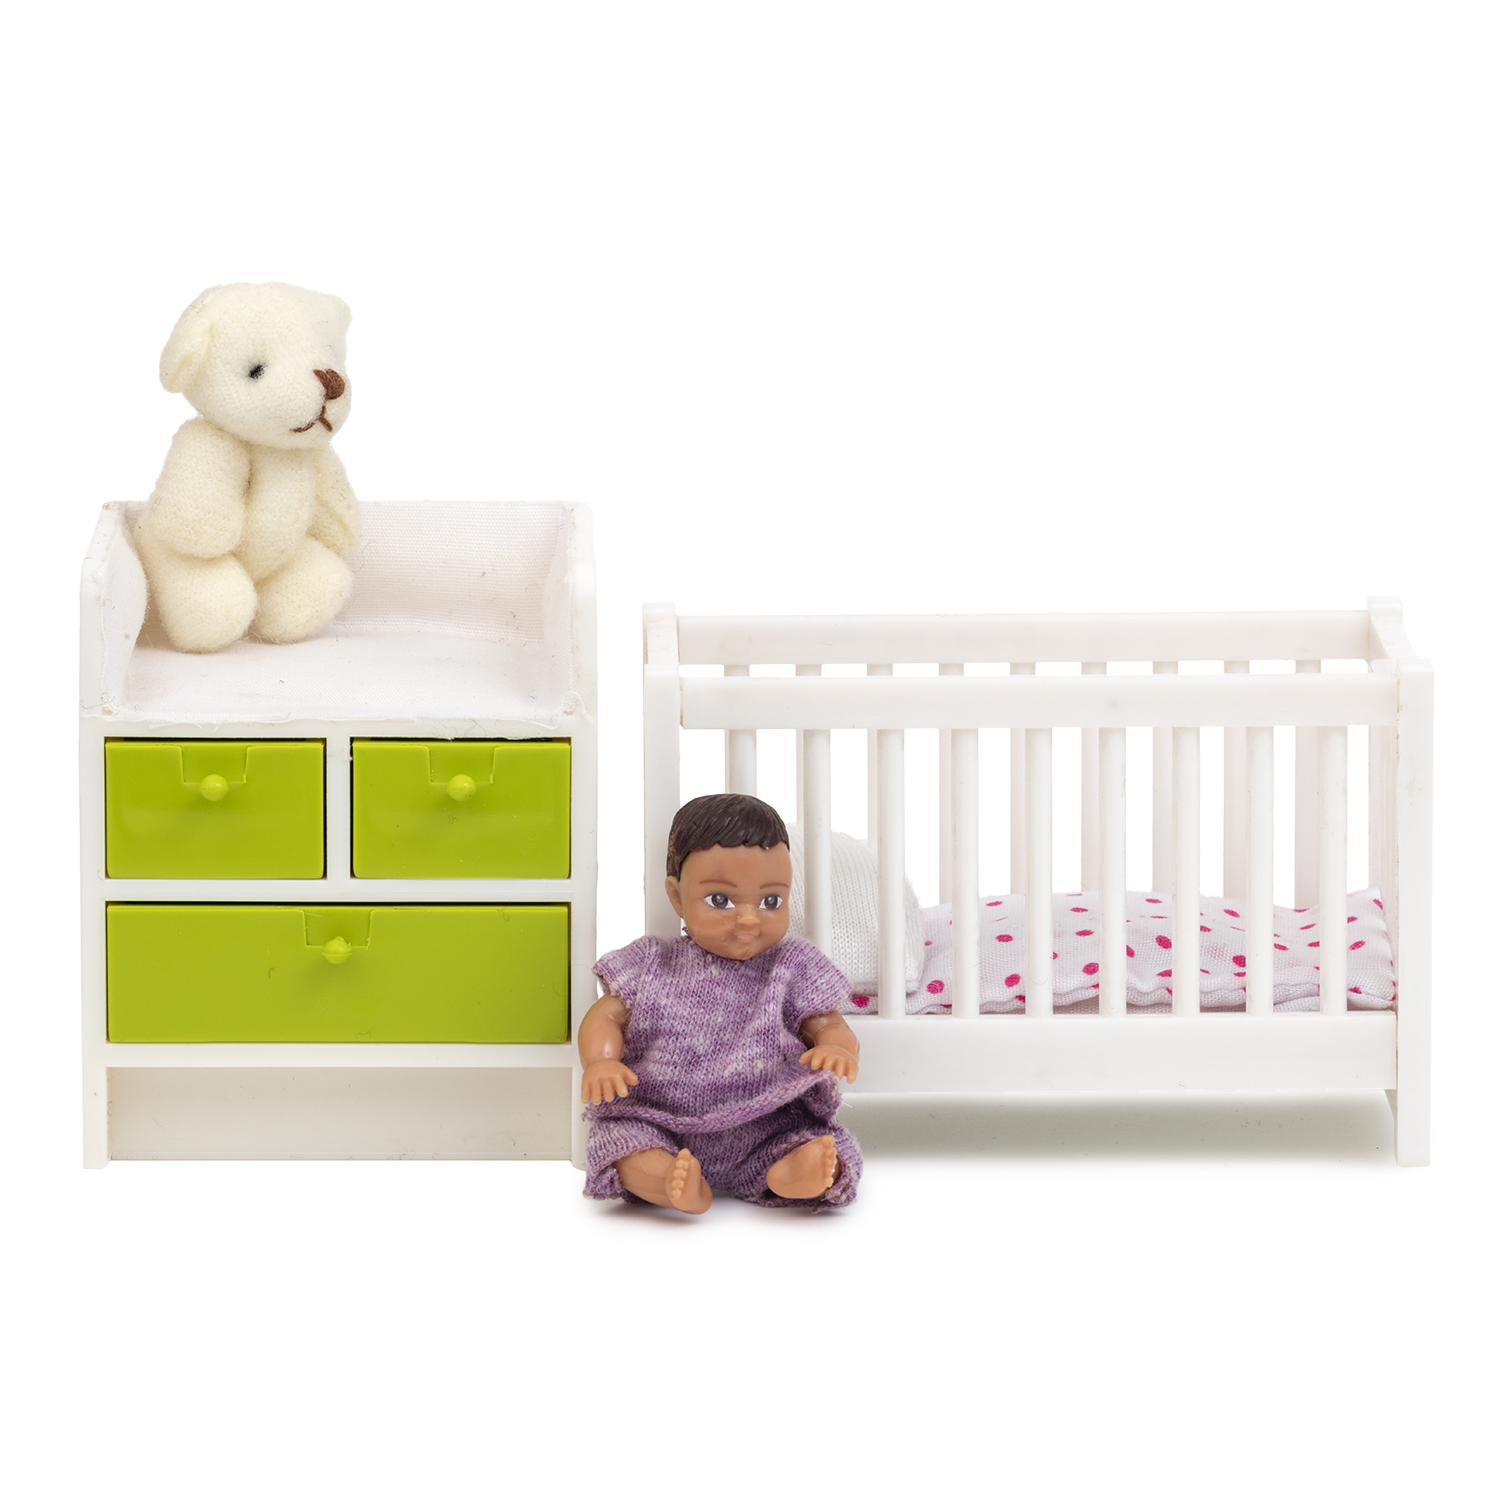 Doll house furniture & doll house accessories lundby dollhouse furniture cot & changing table